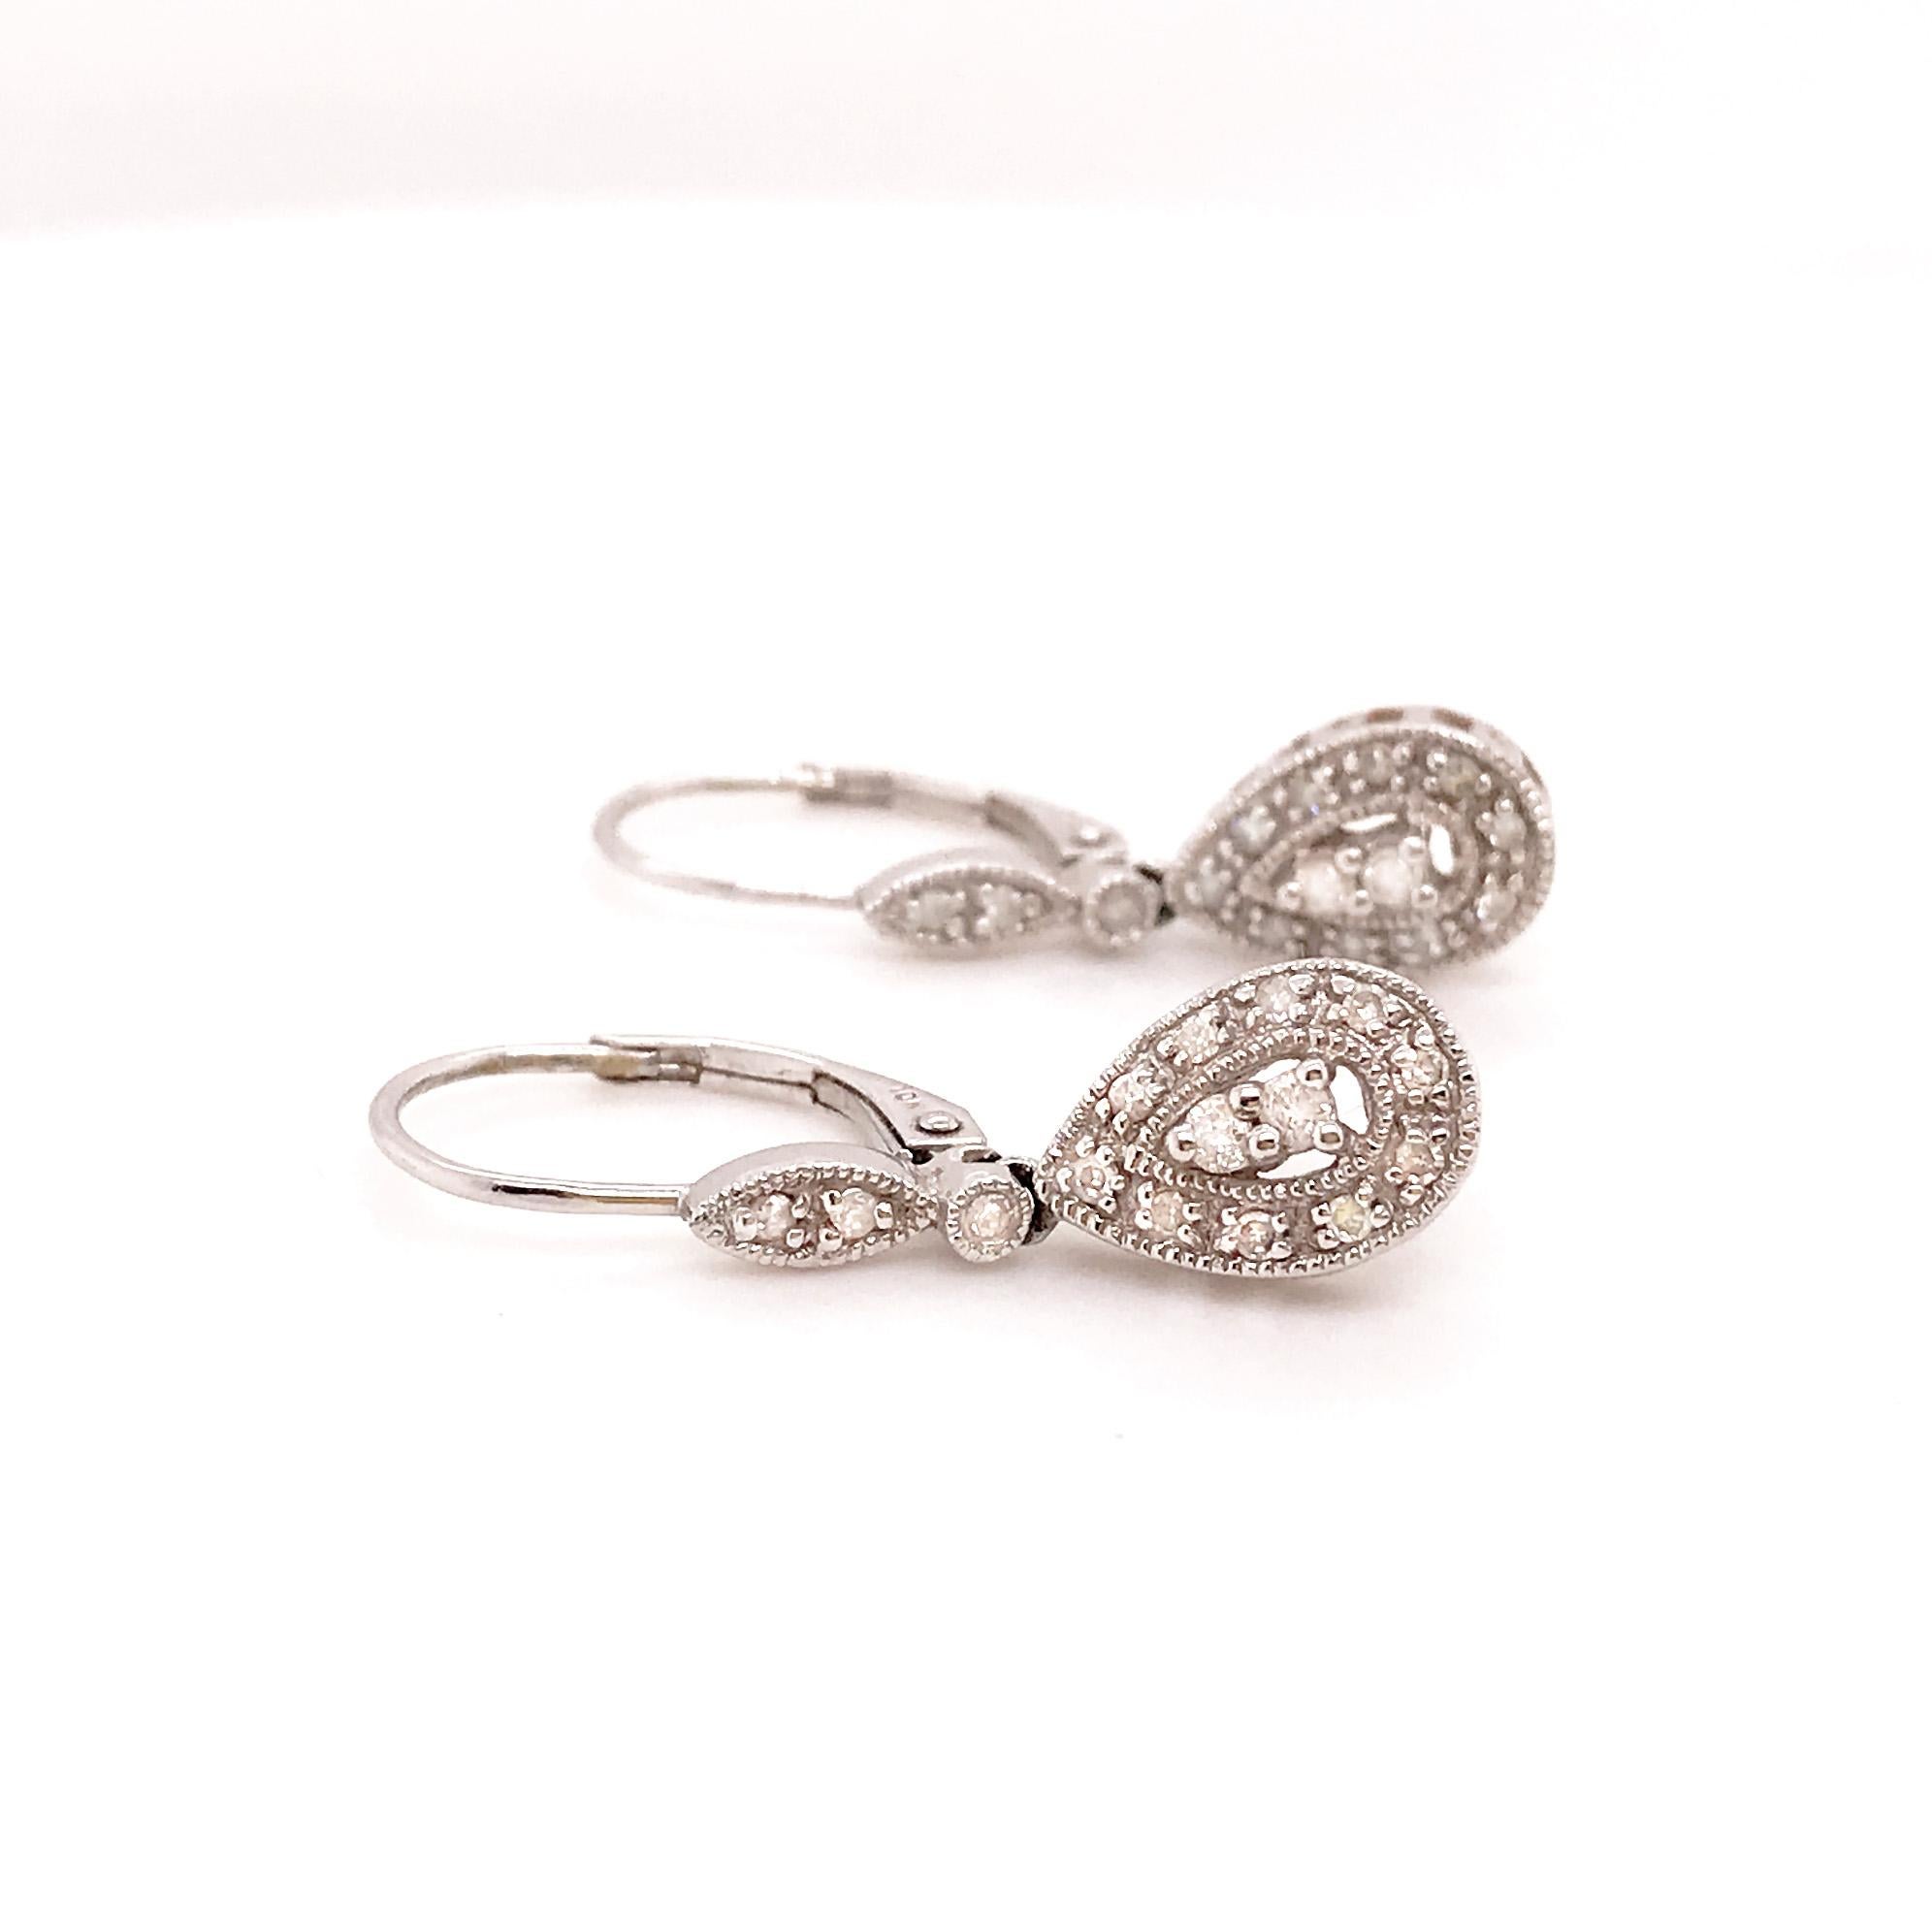 Vintage Diamond Earring Drops/Dangles in White Gold! These pear shaped diamond drops are so classy and bold! The estate earrings are vintage and have a timeless, classic look. With genuine round diamonds set in a pear shaped formation these earrings